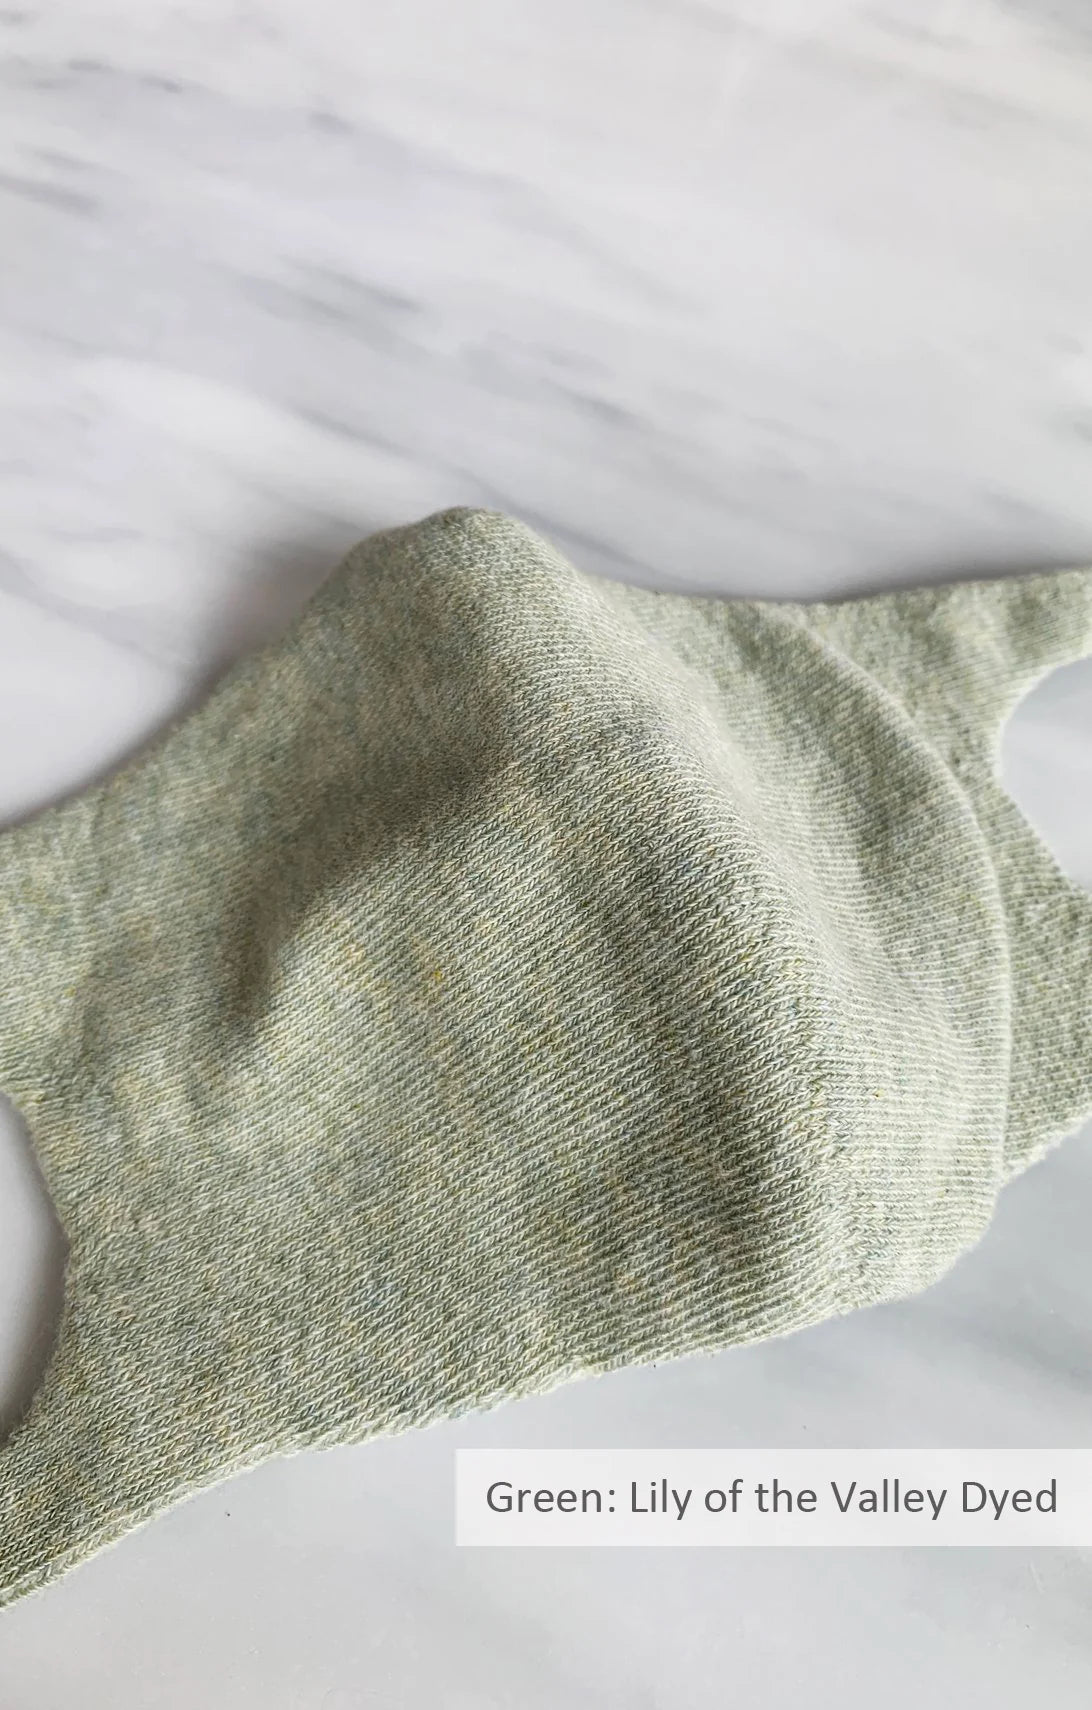 Green color of Botanical Dyed Organic Cotton Face Mask by Tabbisocks Wellness